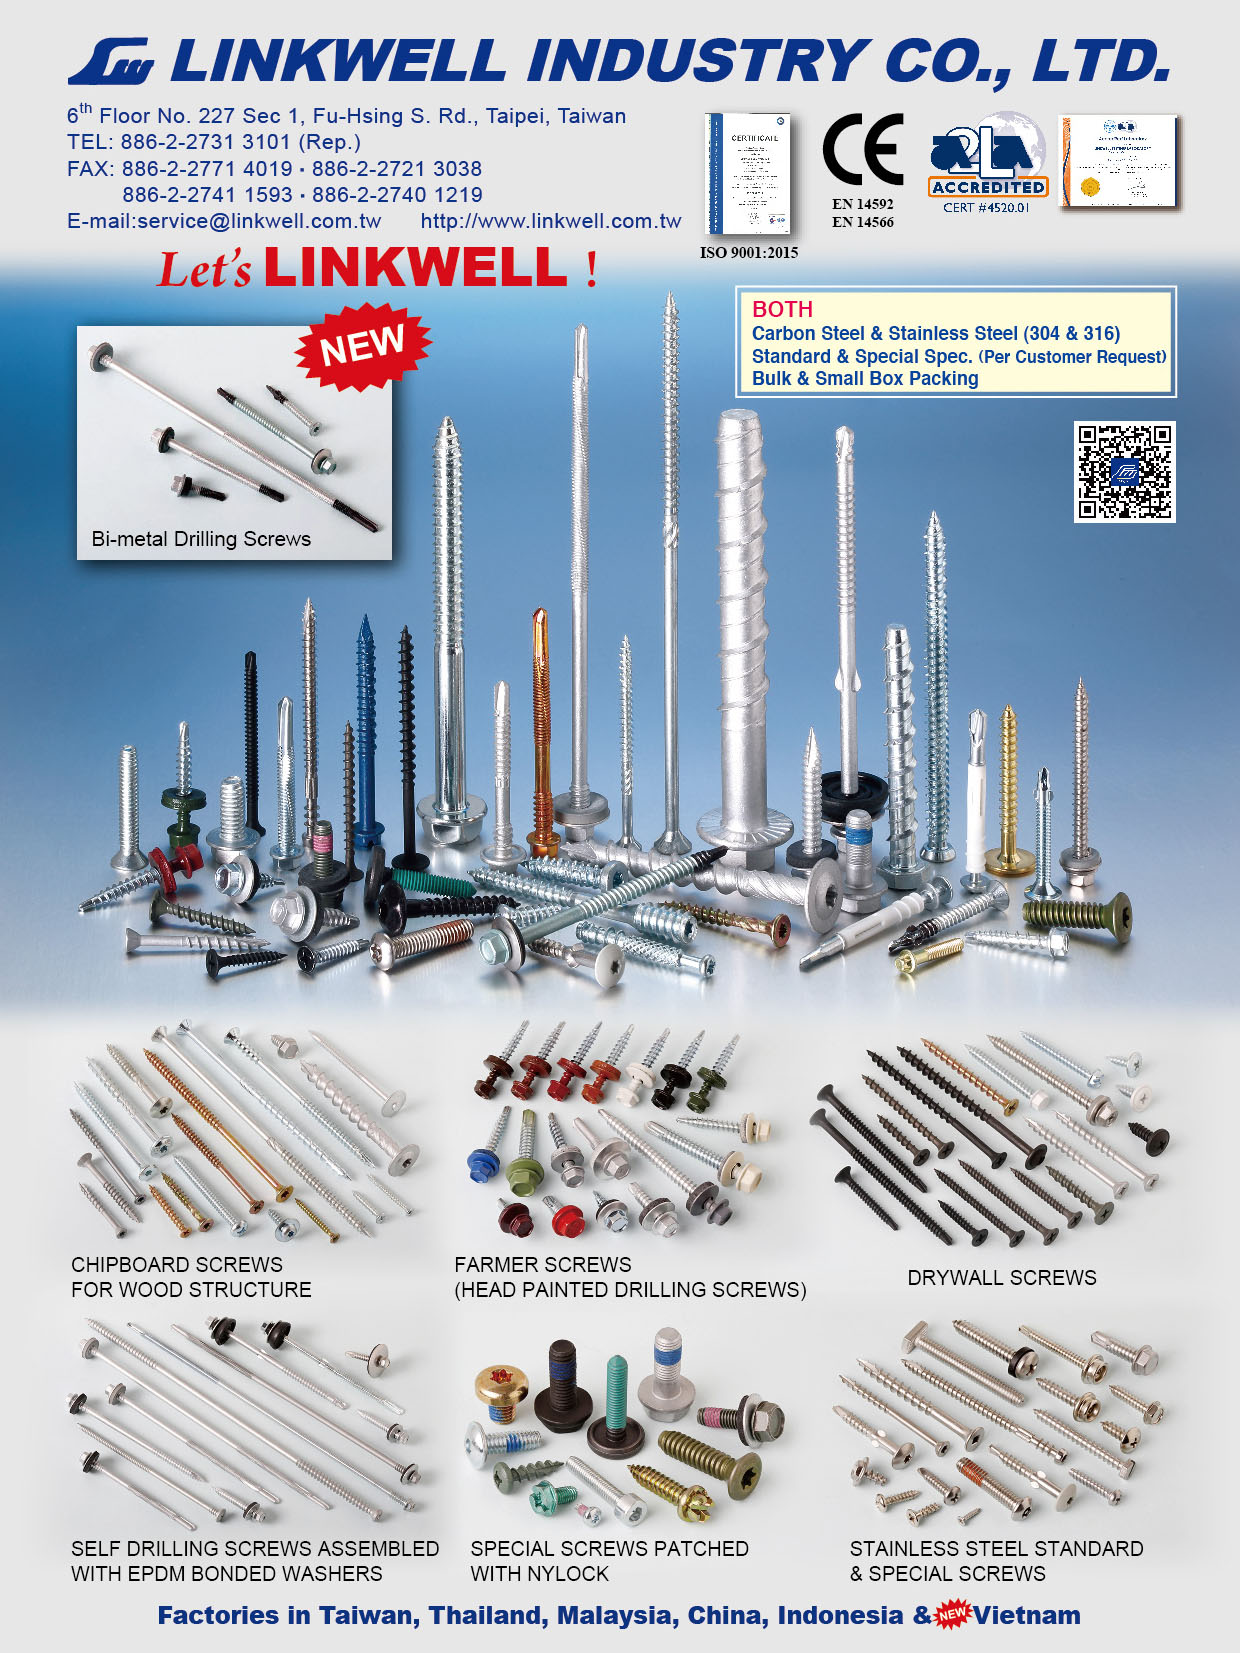 LINKWELL INDUSTRY CO., LTD. Online Catalogues